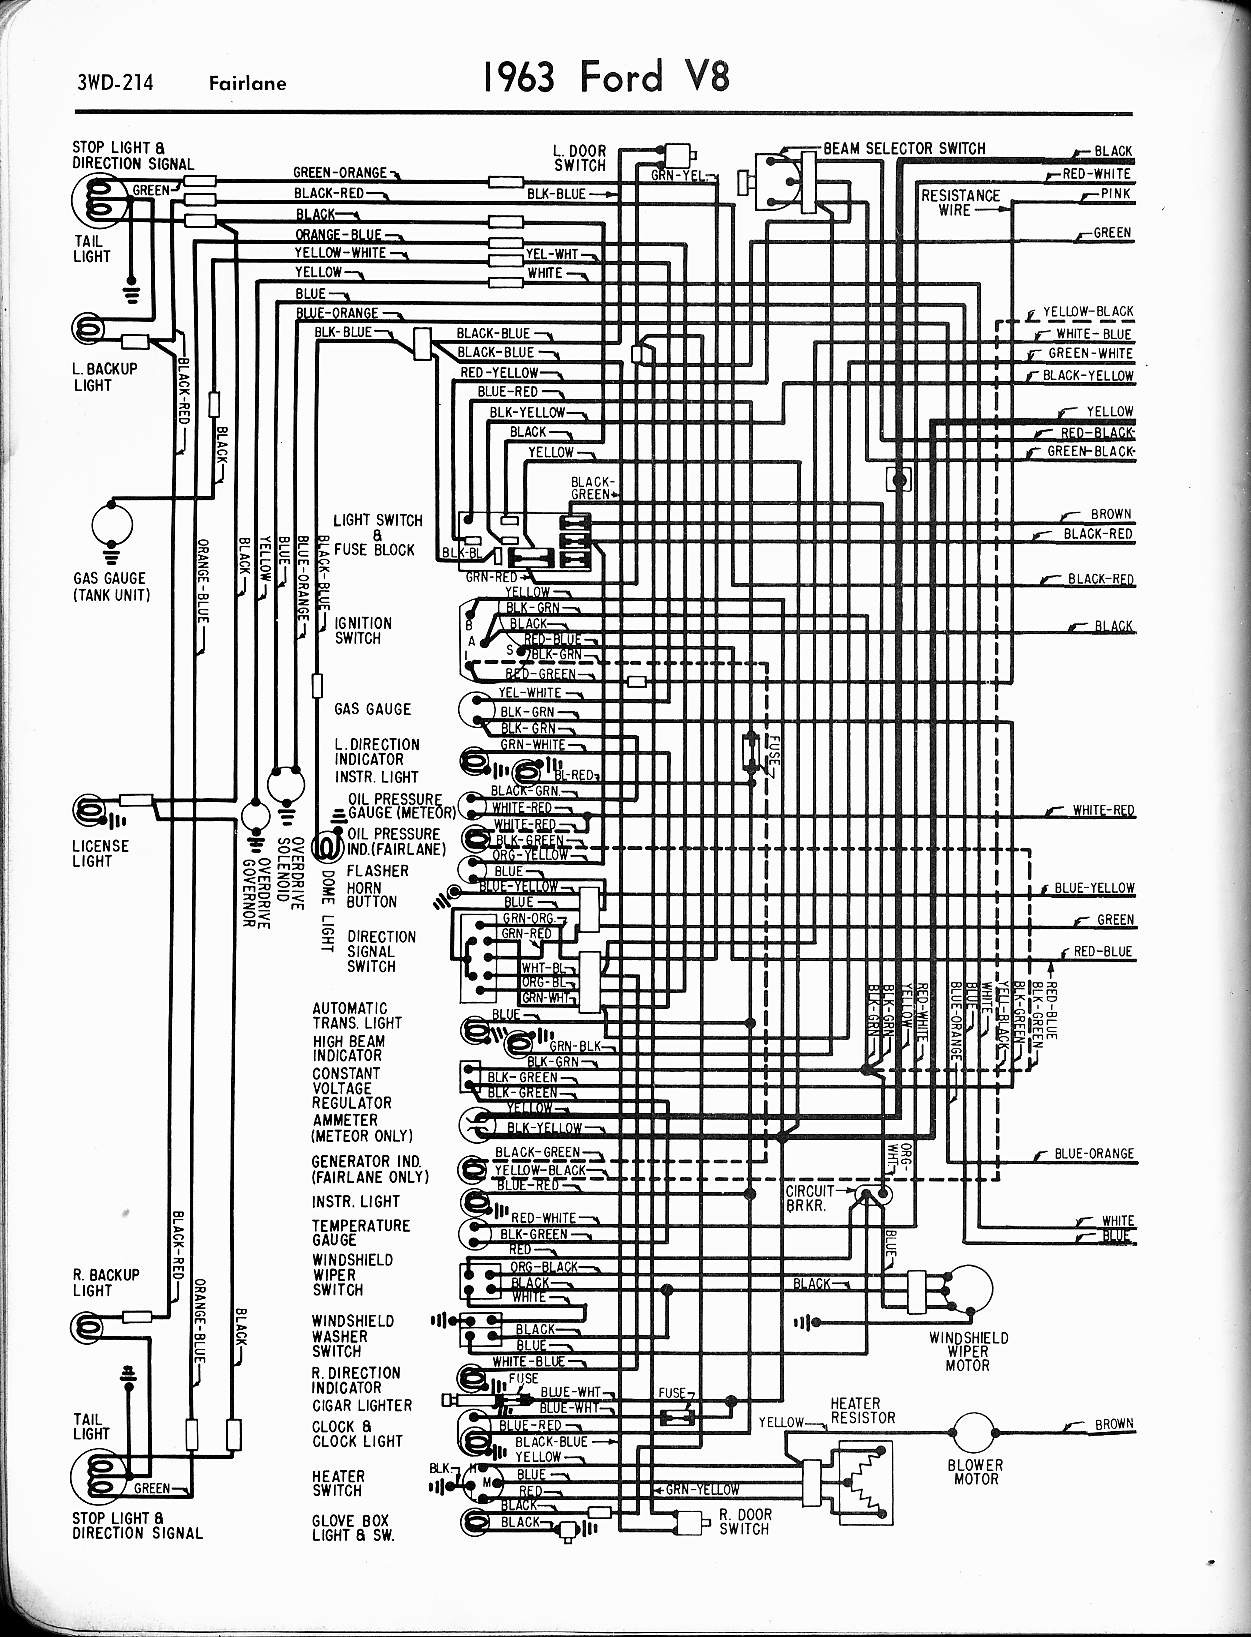 Ford Ignition Wiring Diagram 57 65 ford Wiring Diagrams Of Ford Ignition Wiring Diagram